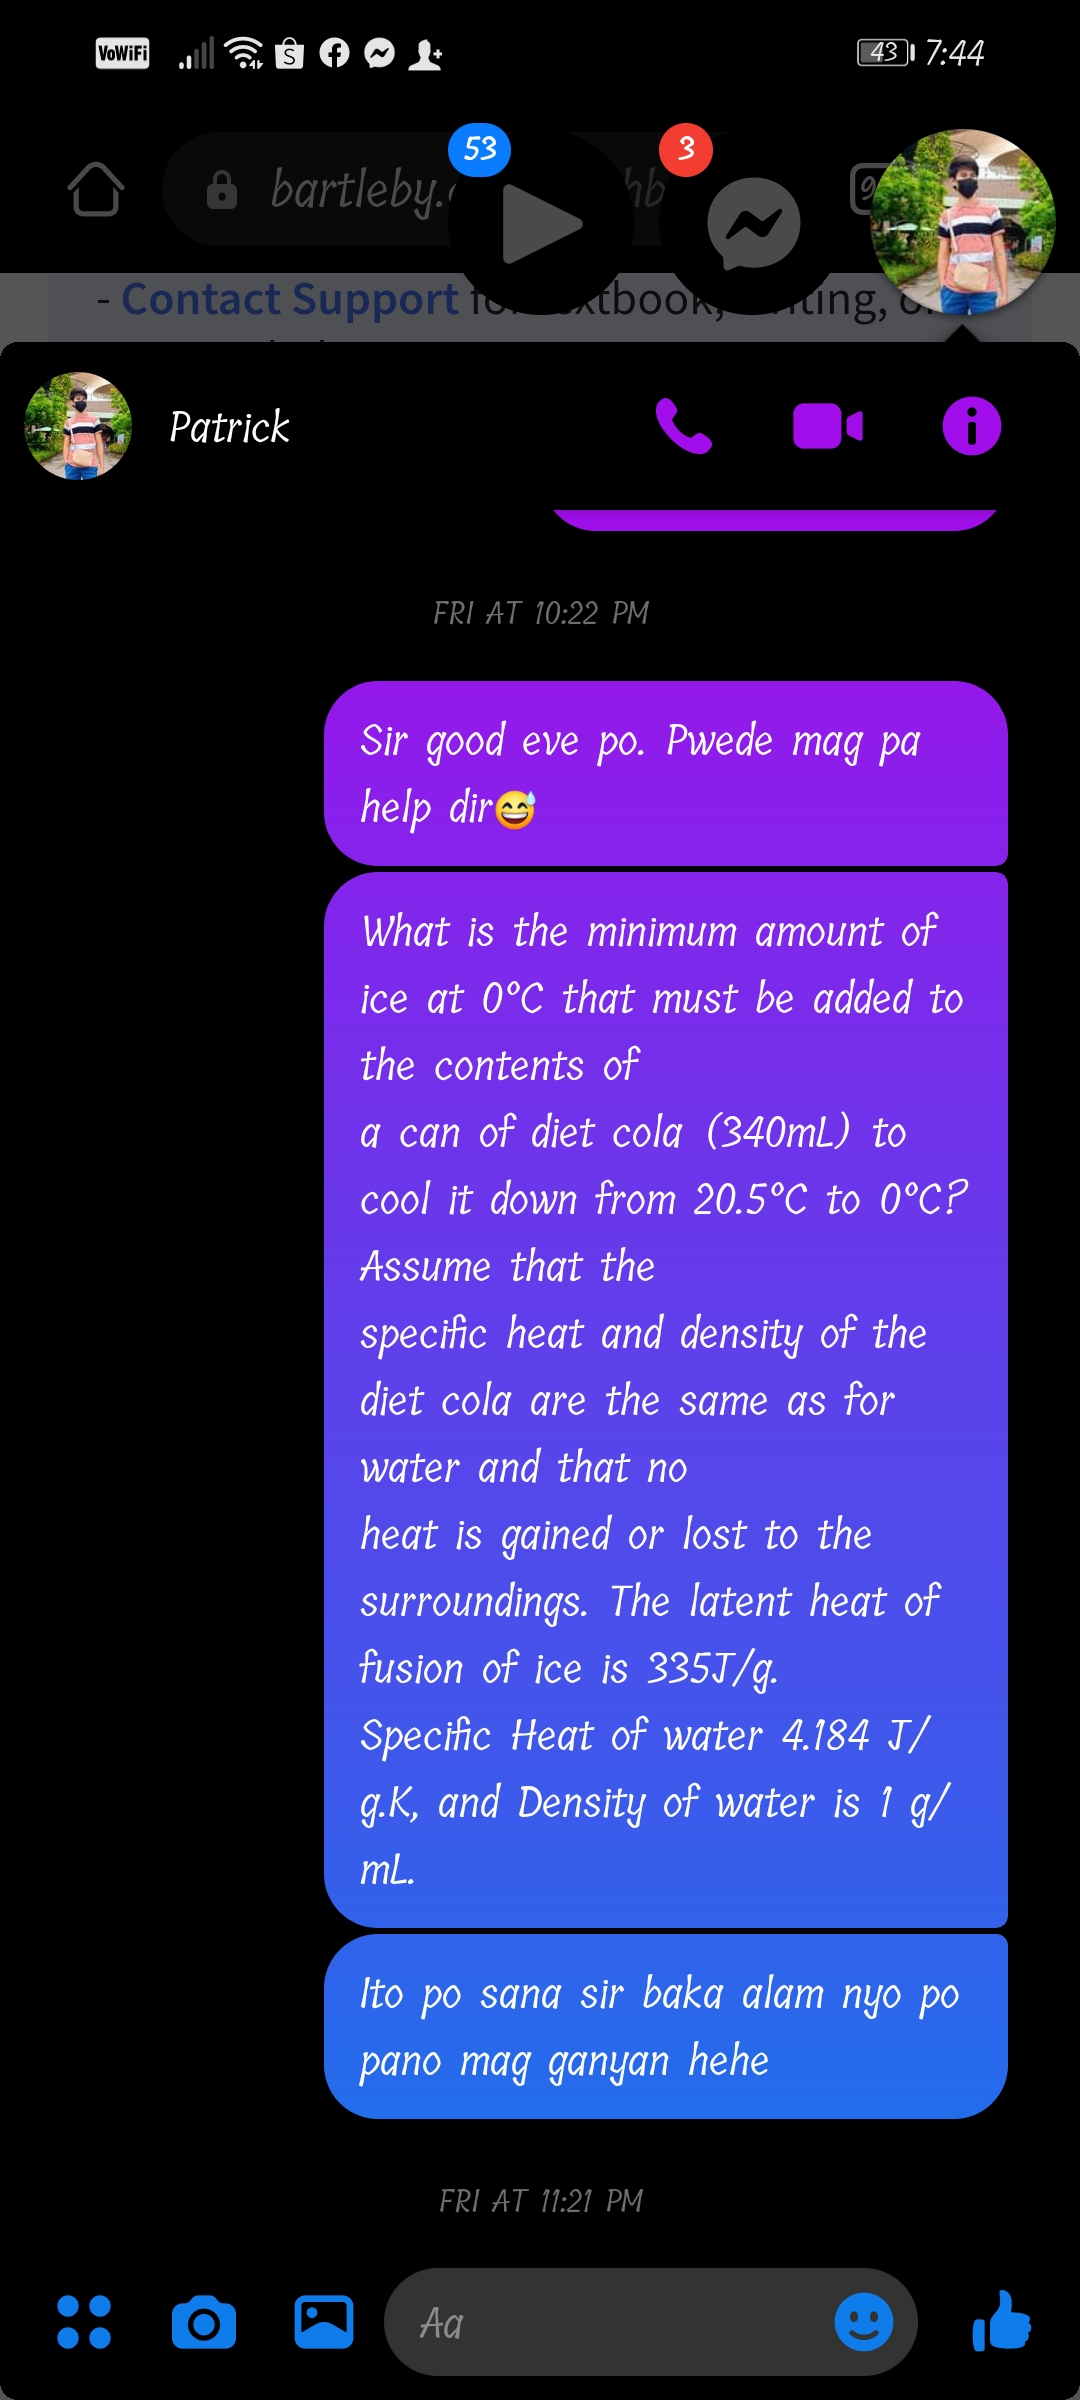 VoWiFi
43 1 7:44
53
3
A bartleby."
- Contact Support ioxtboon,ung,
Patrick
FRI AT 10:22 PM
Sir good eve po. Pwede mag pa
help dire
What is the minimum amount of
ice at 0°C that must be added to
the contents of
a can of diet cola (340mL) to
cool it down from 20.5°C to 0°C?
Assume that the
specific heat and density of the
diet cola are the same as for
water and that no
heat is gained or lost to the
surroundings. The latent heat of
fusion of ice is 335J/g.
Specific Heat of water 4.184 J/
g.K, and Density of water is 1 g/
mL.
Ito po sana sir baka alam nyo po
pano mag ganyan hehe
FRI AT 11:21 PM
Aa
